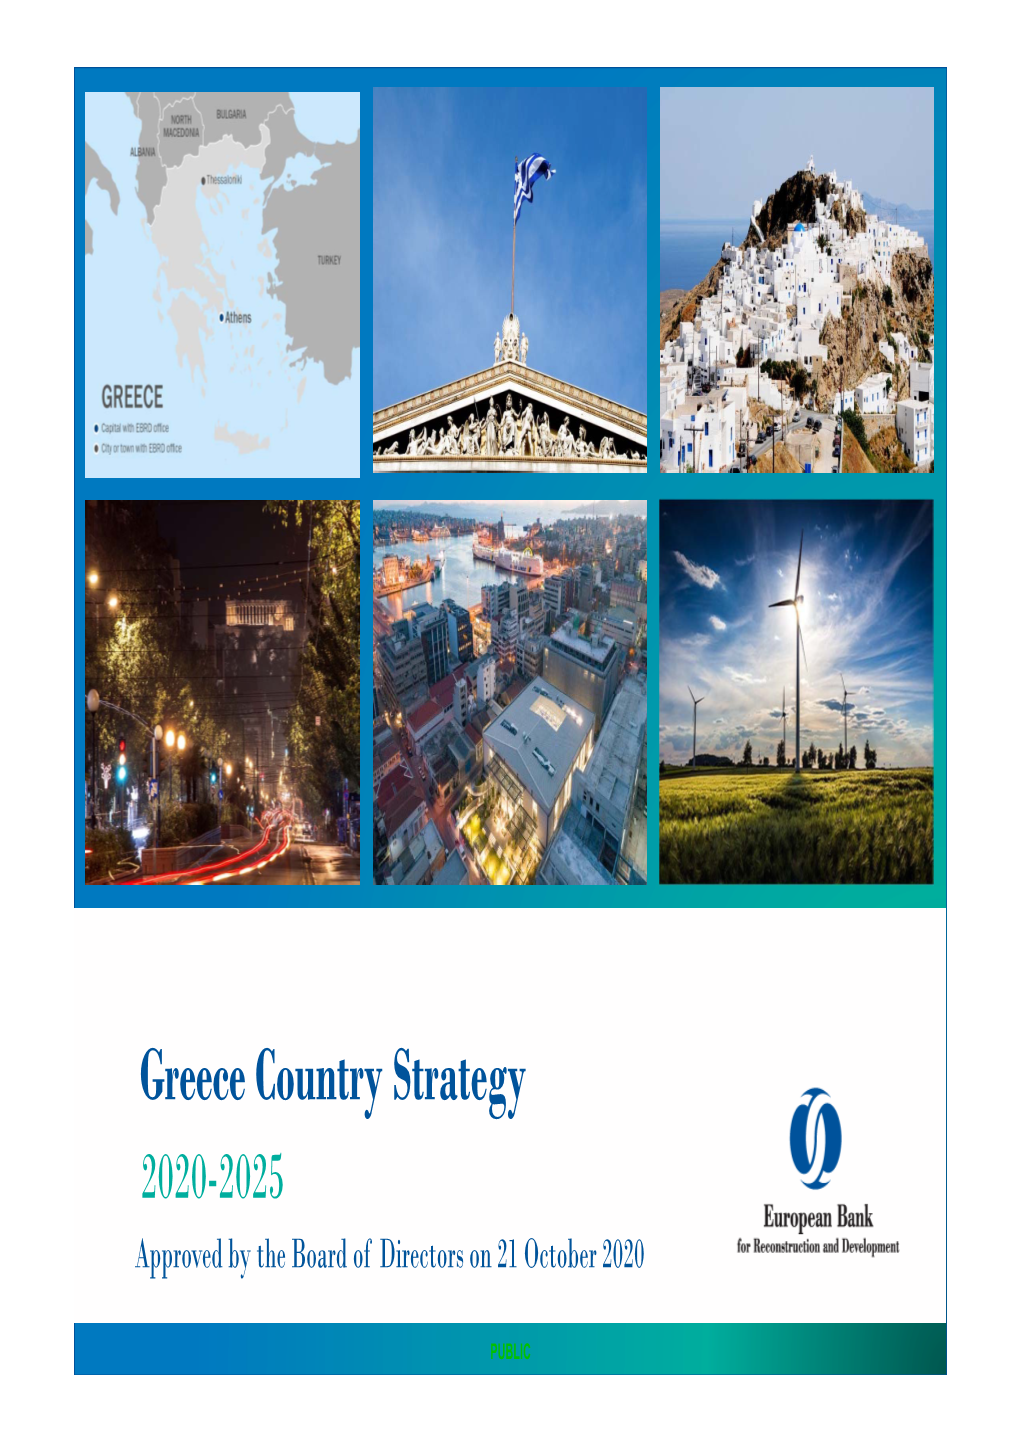 Greece Country Strategy 2020-2025 Approved by the Board of Directors on 21 October 2020